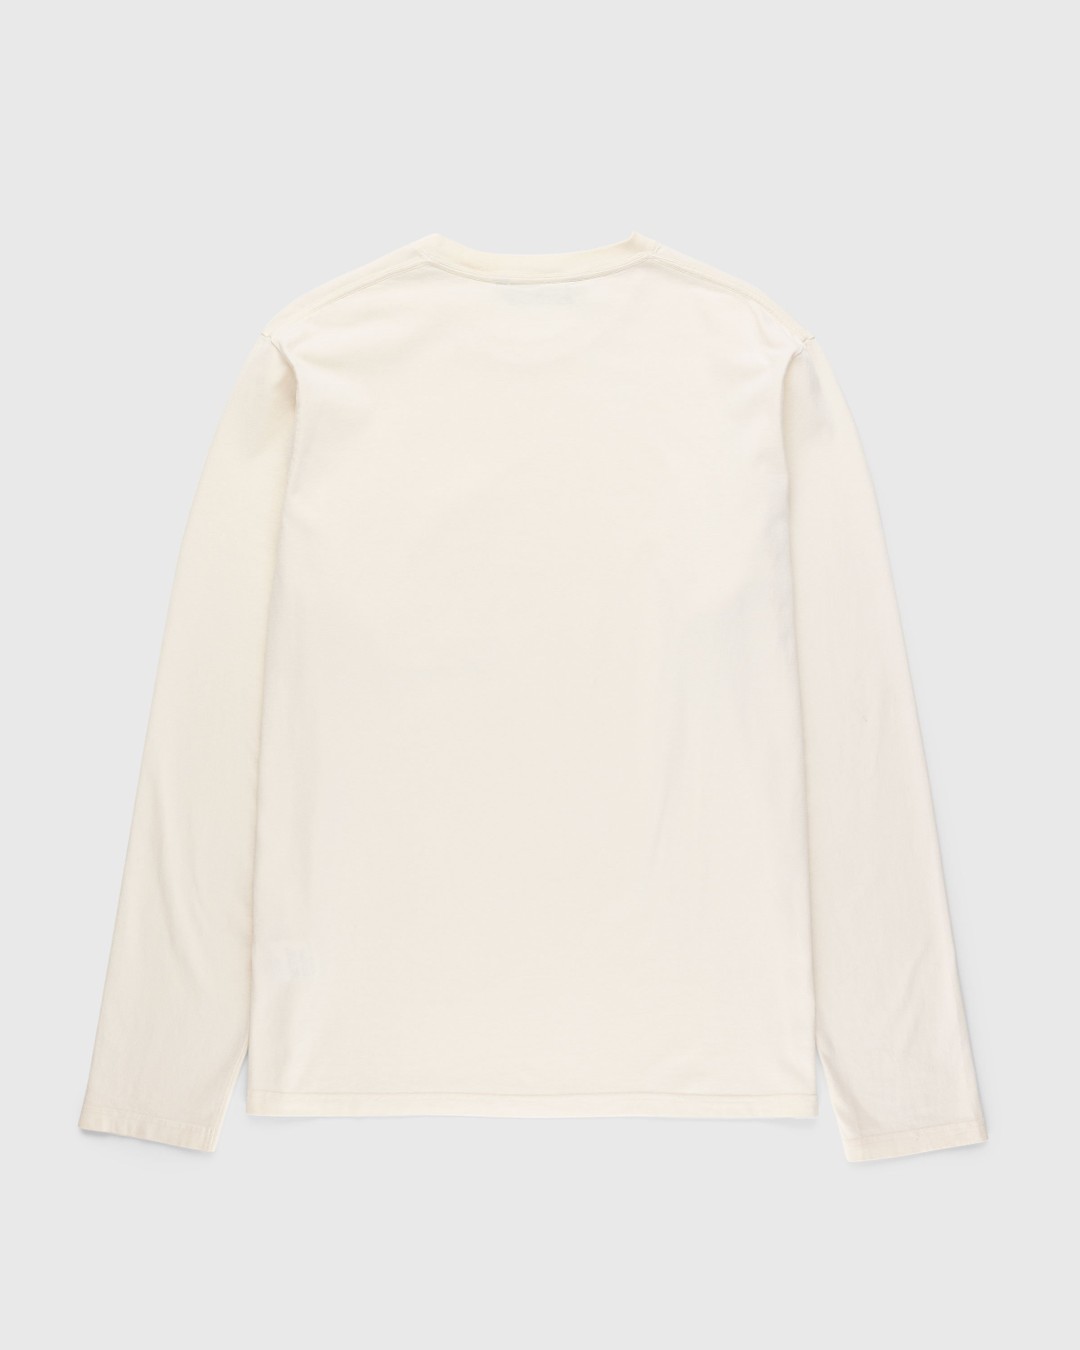 Highsnobiety HS05 – Pigment Dyed Boxy Long Sleeves Jersey Natural - Longsleeves - Beige - Image 2